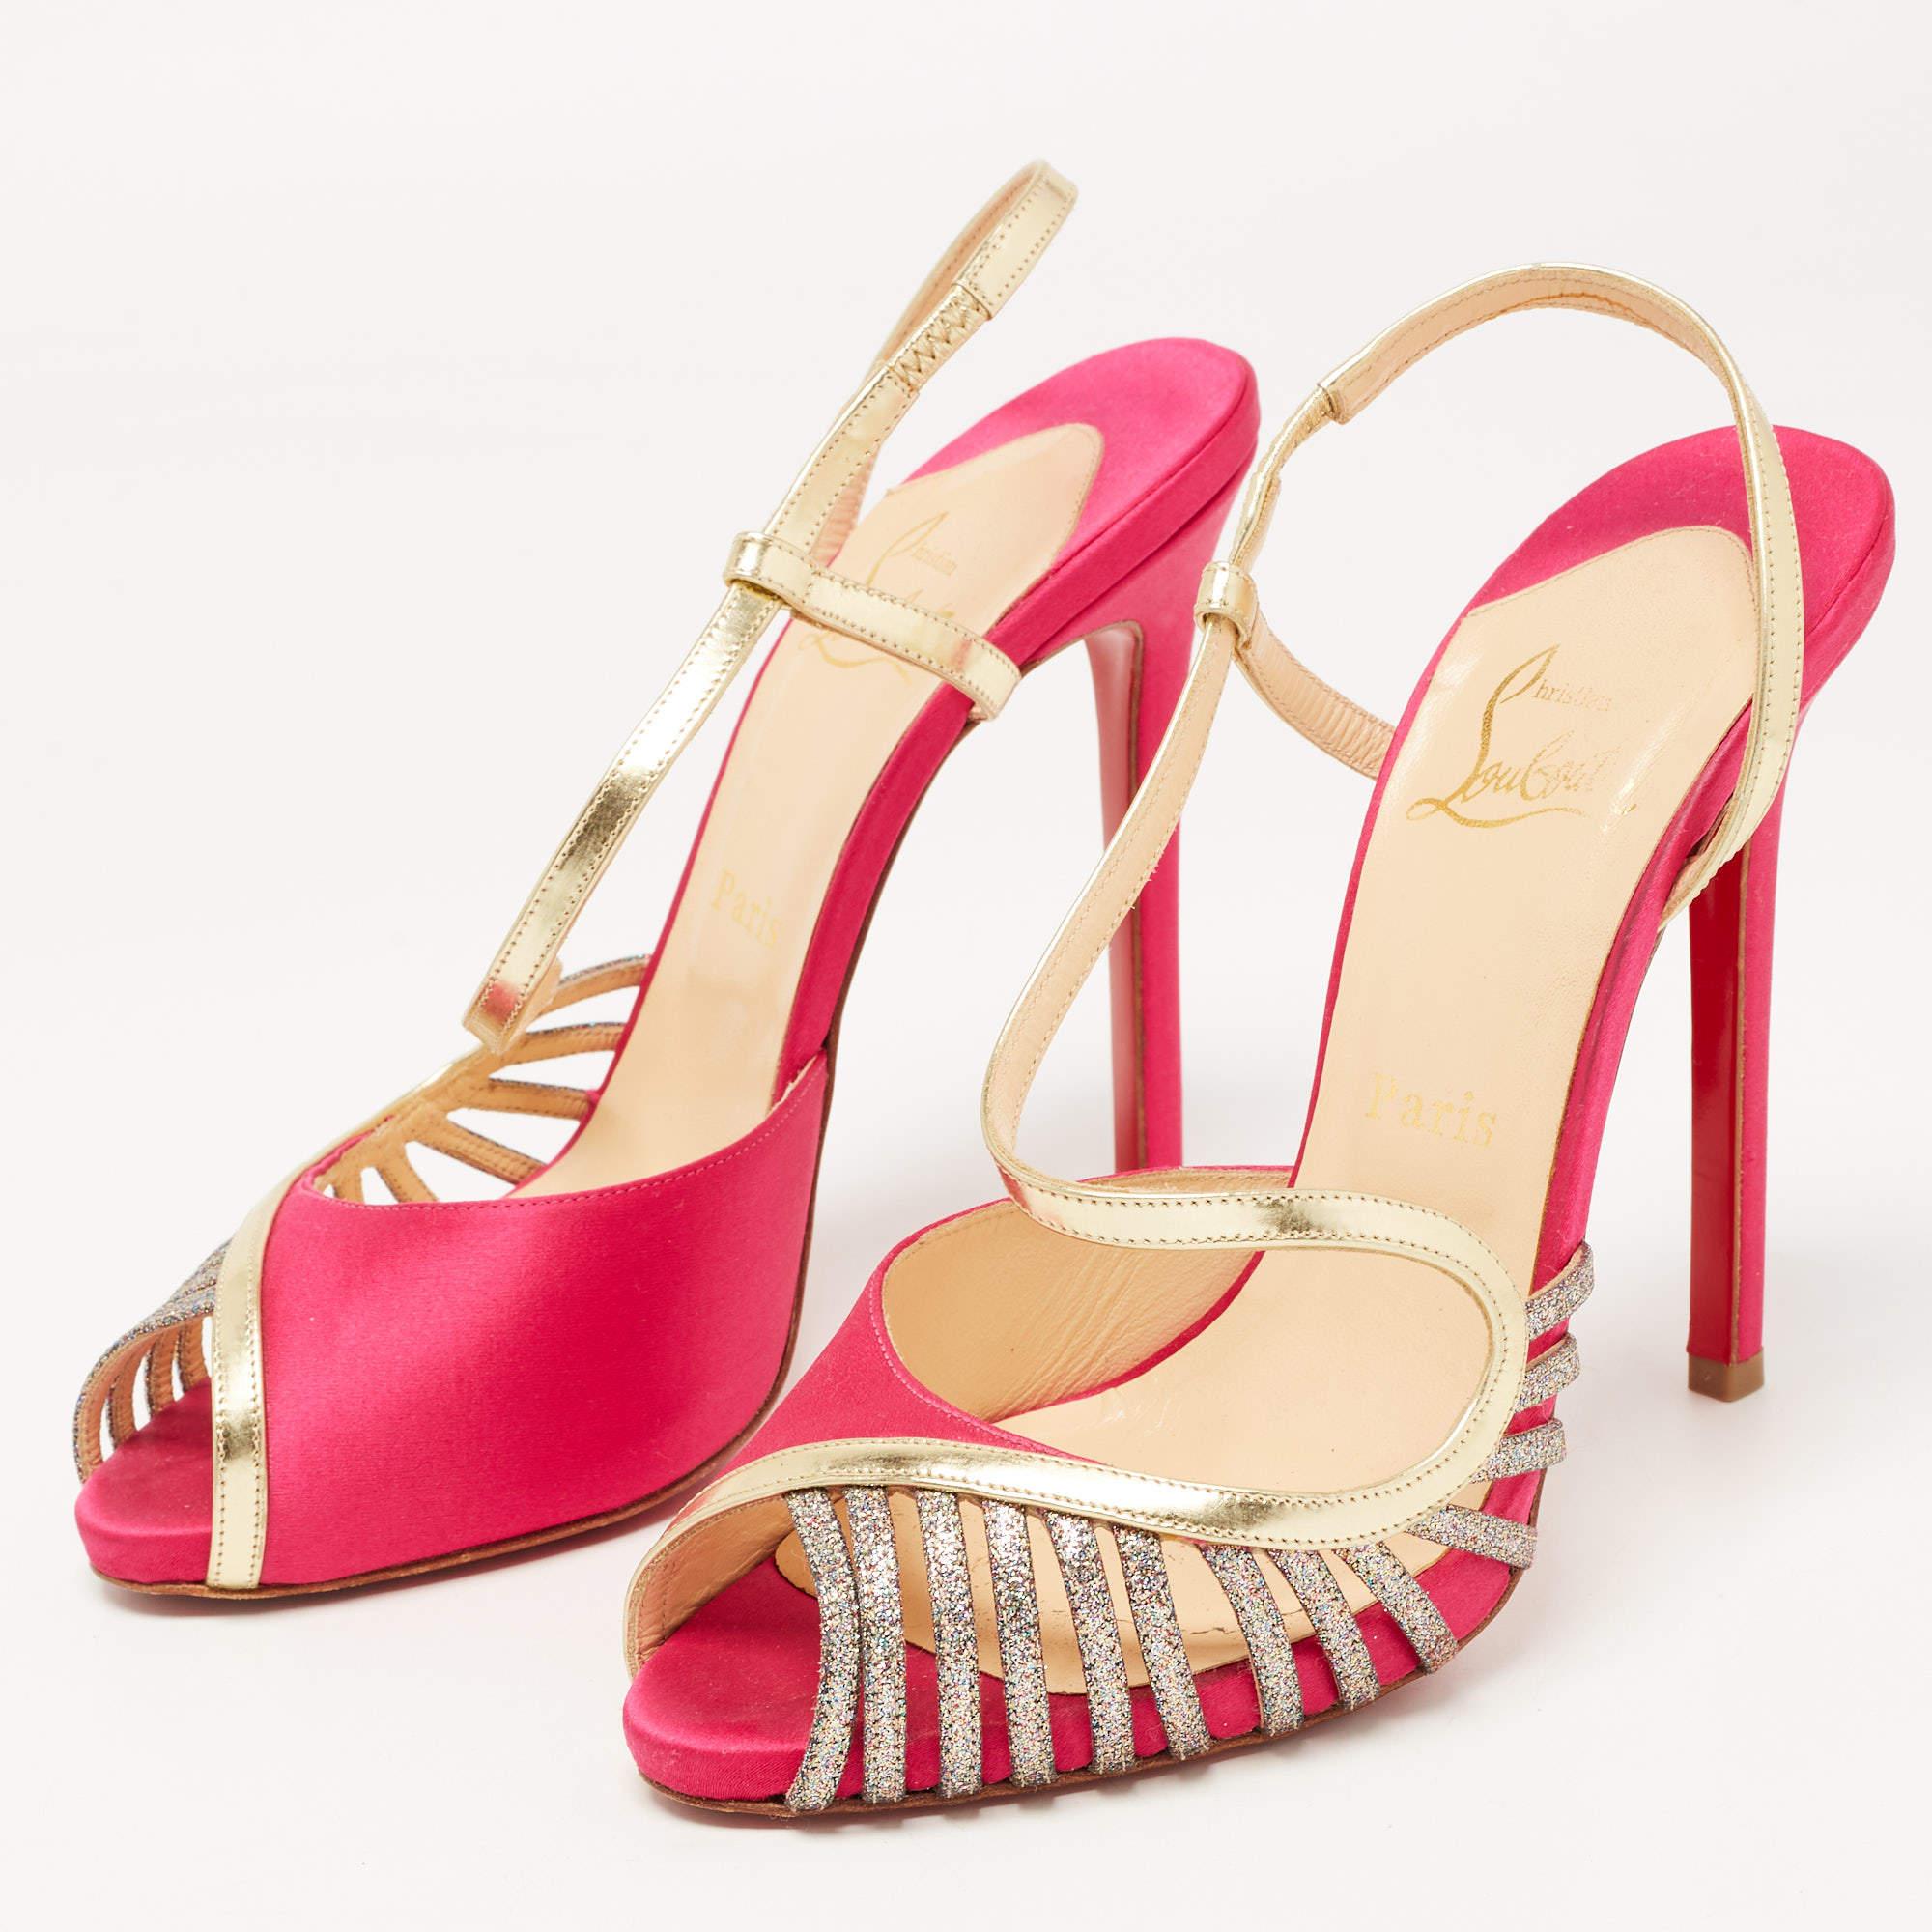 Women's Christian Louboutin Pink/Gold Satin, Leather and Glitter Strappy Sandals Size 39